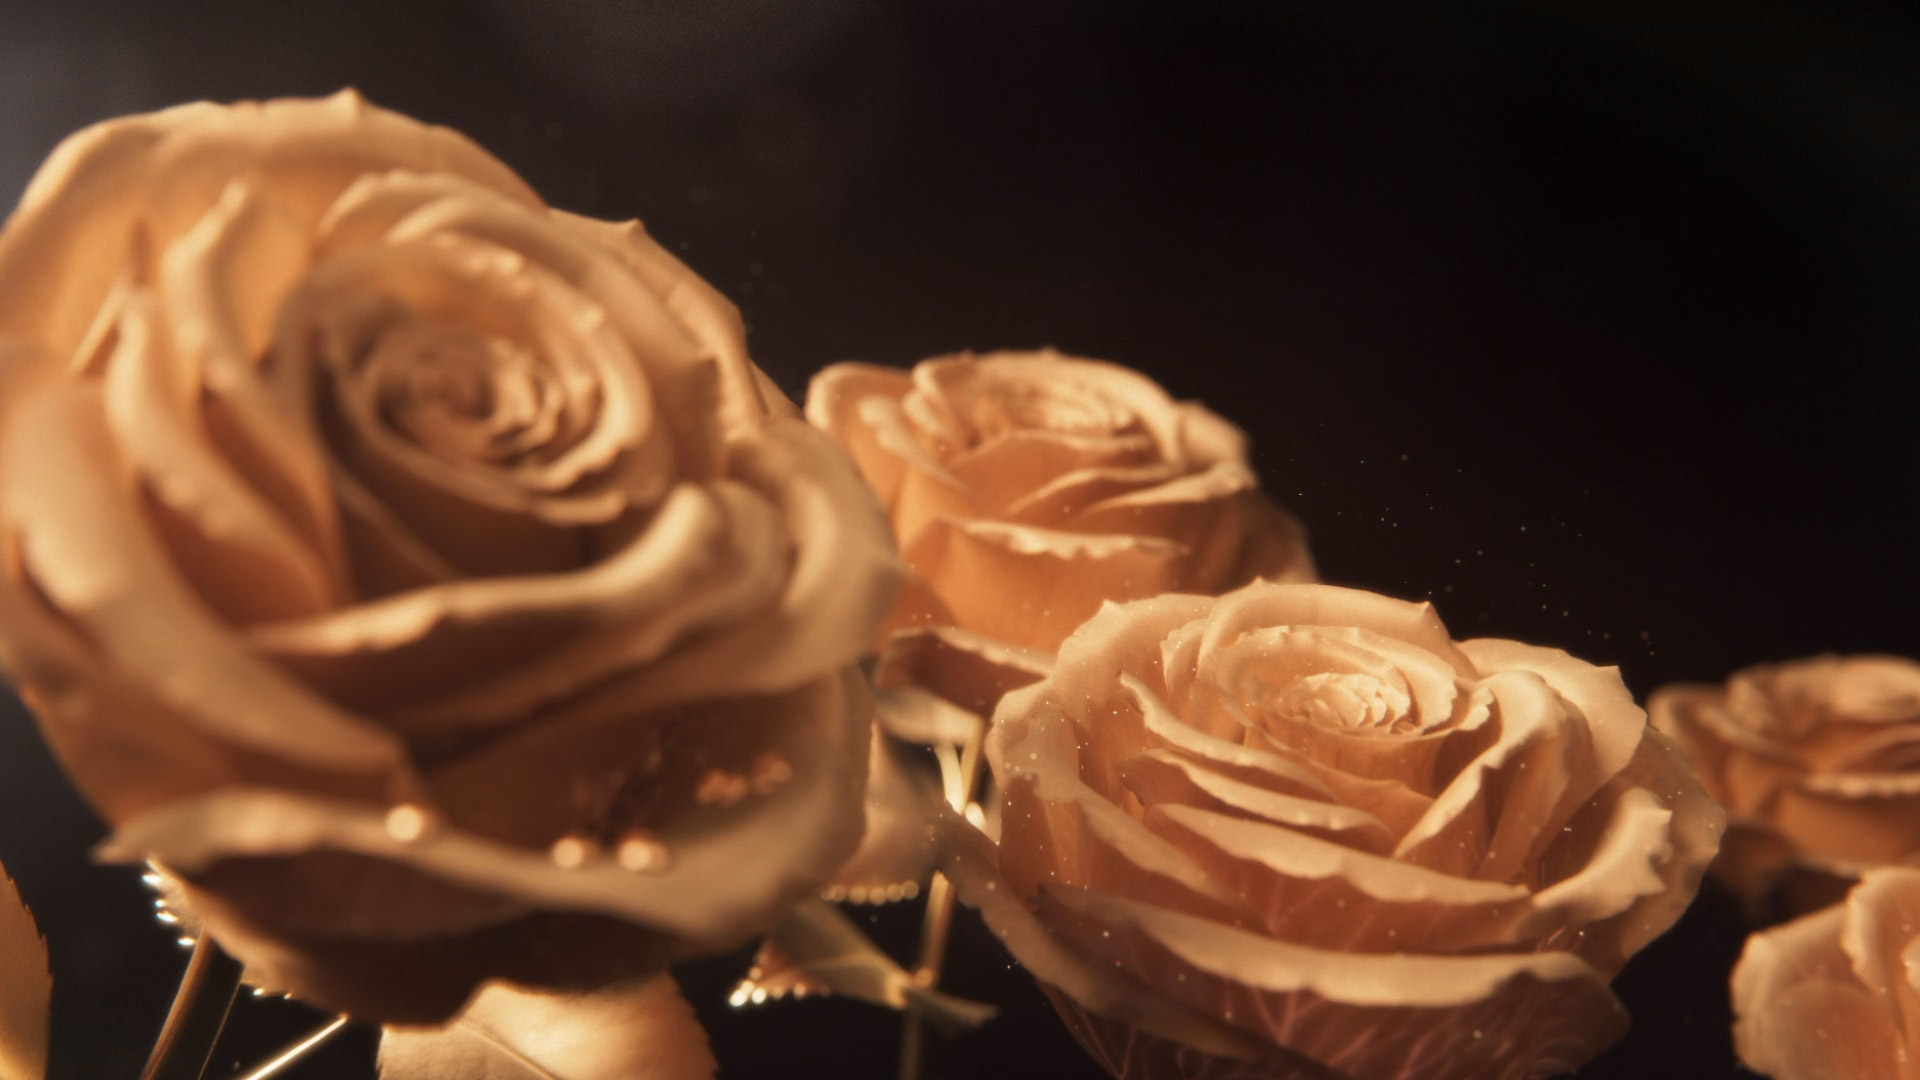 Golden roses, Animated film by Magoo Animation.